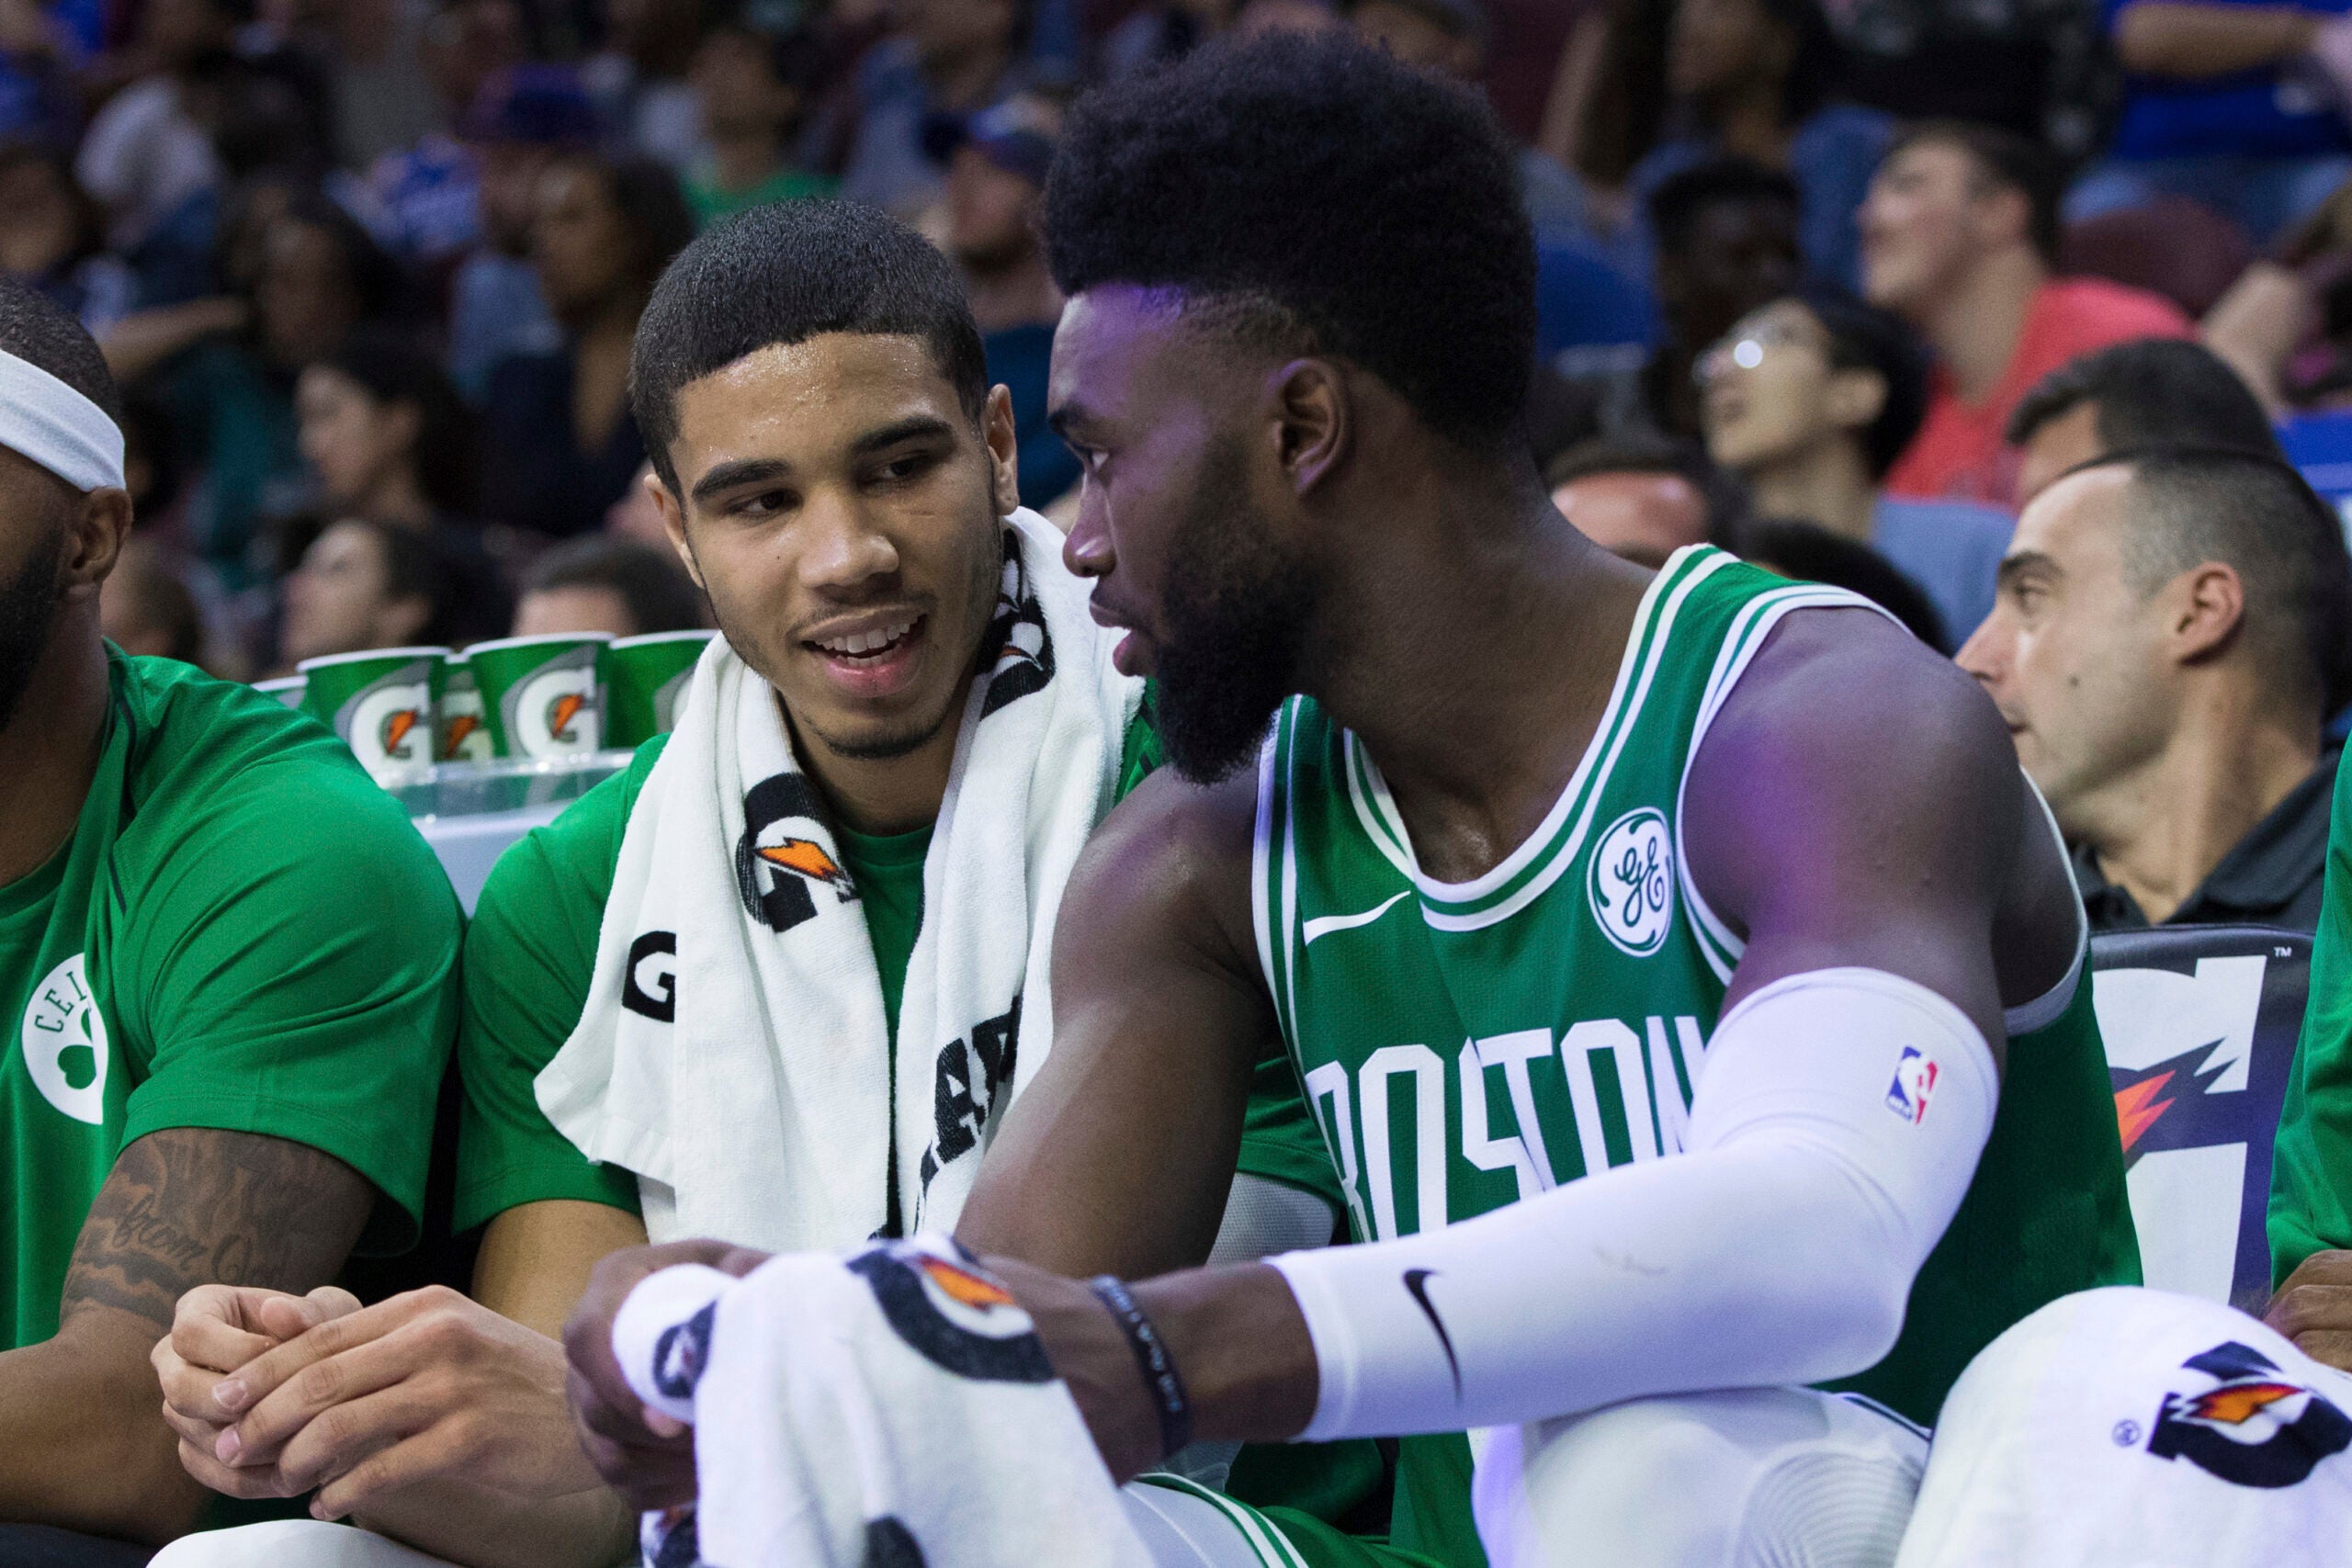 Jayson Tatum and Jaylen Brown's strong bond was on display during